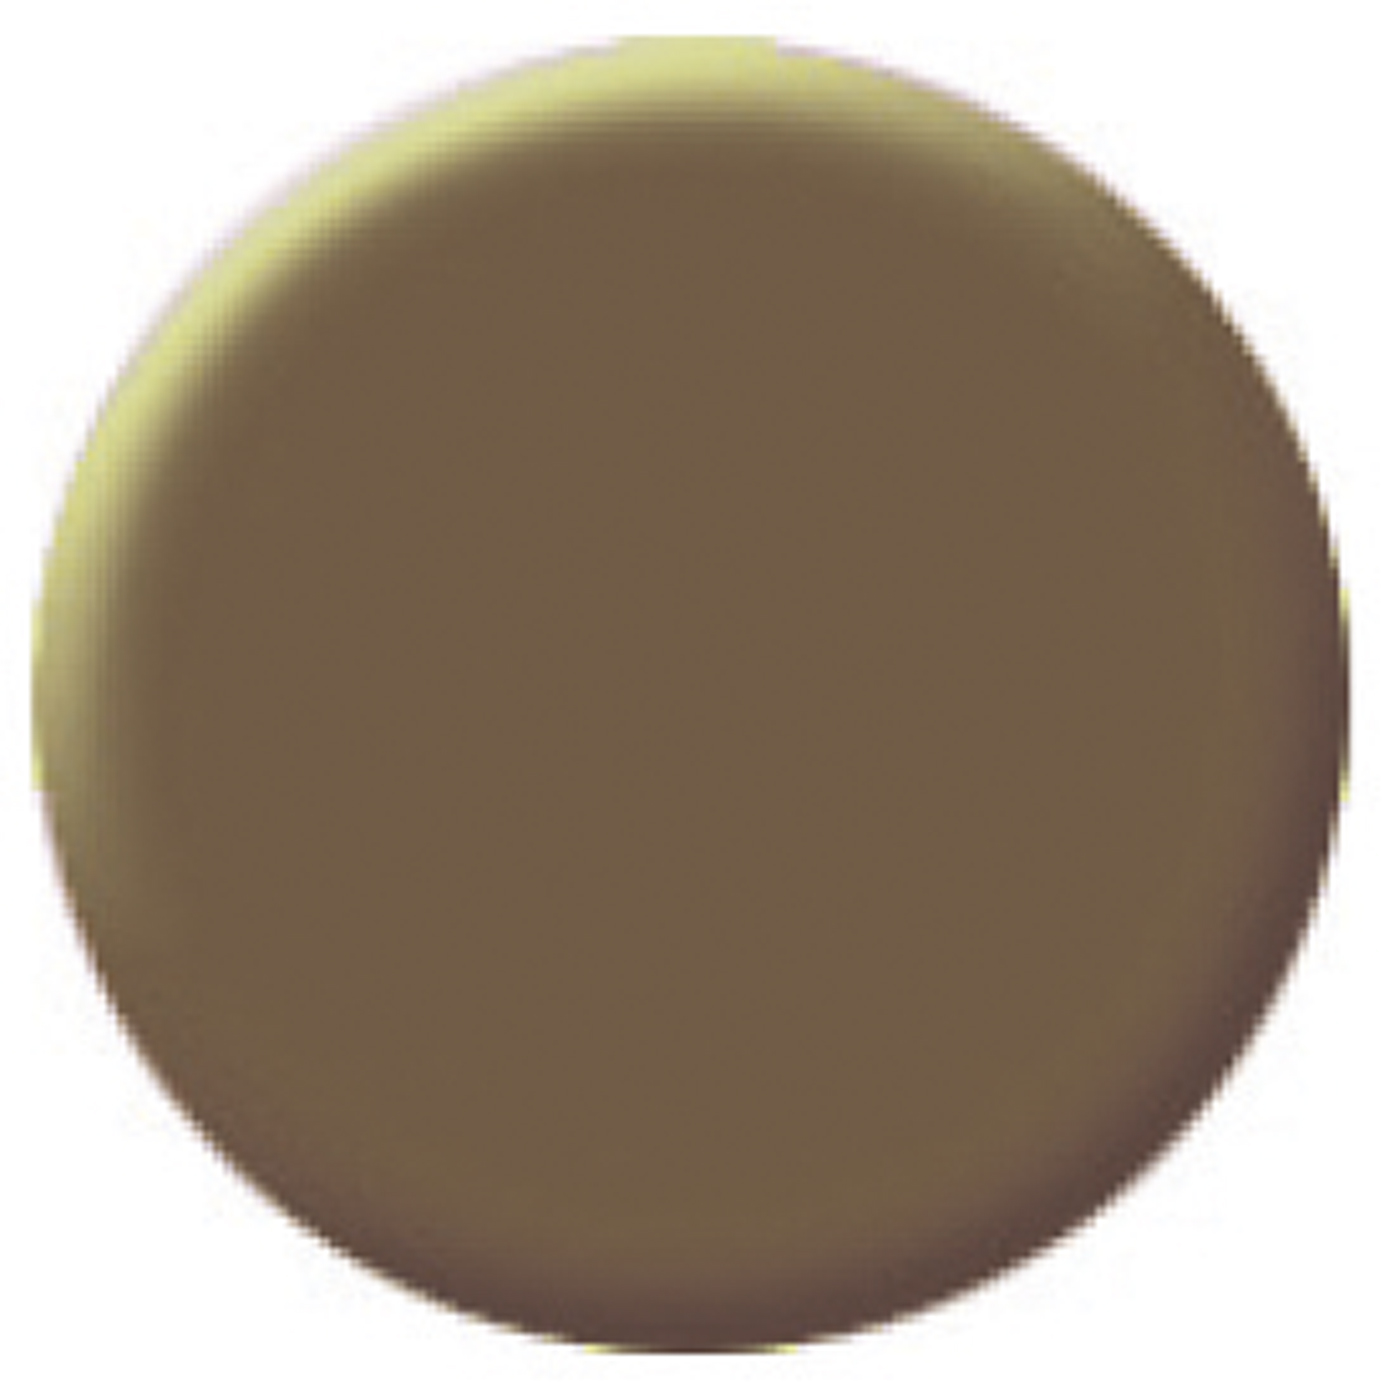 Colorit Trend opaque, coffee liquer - 5 g